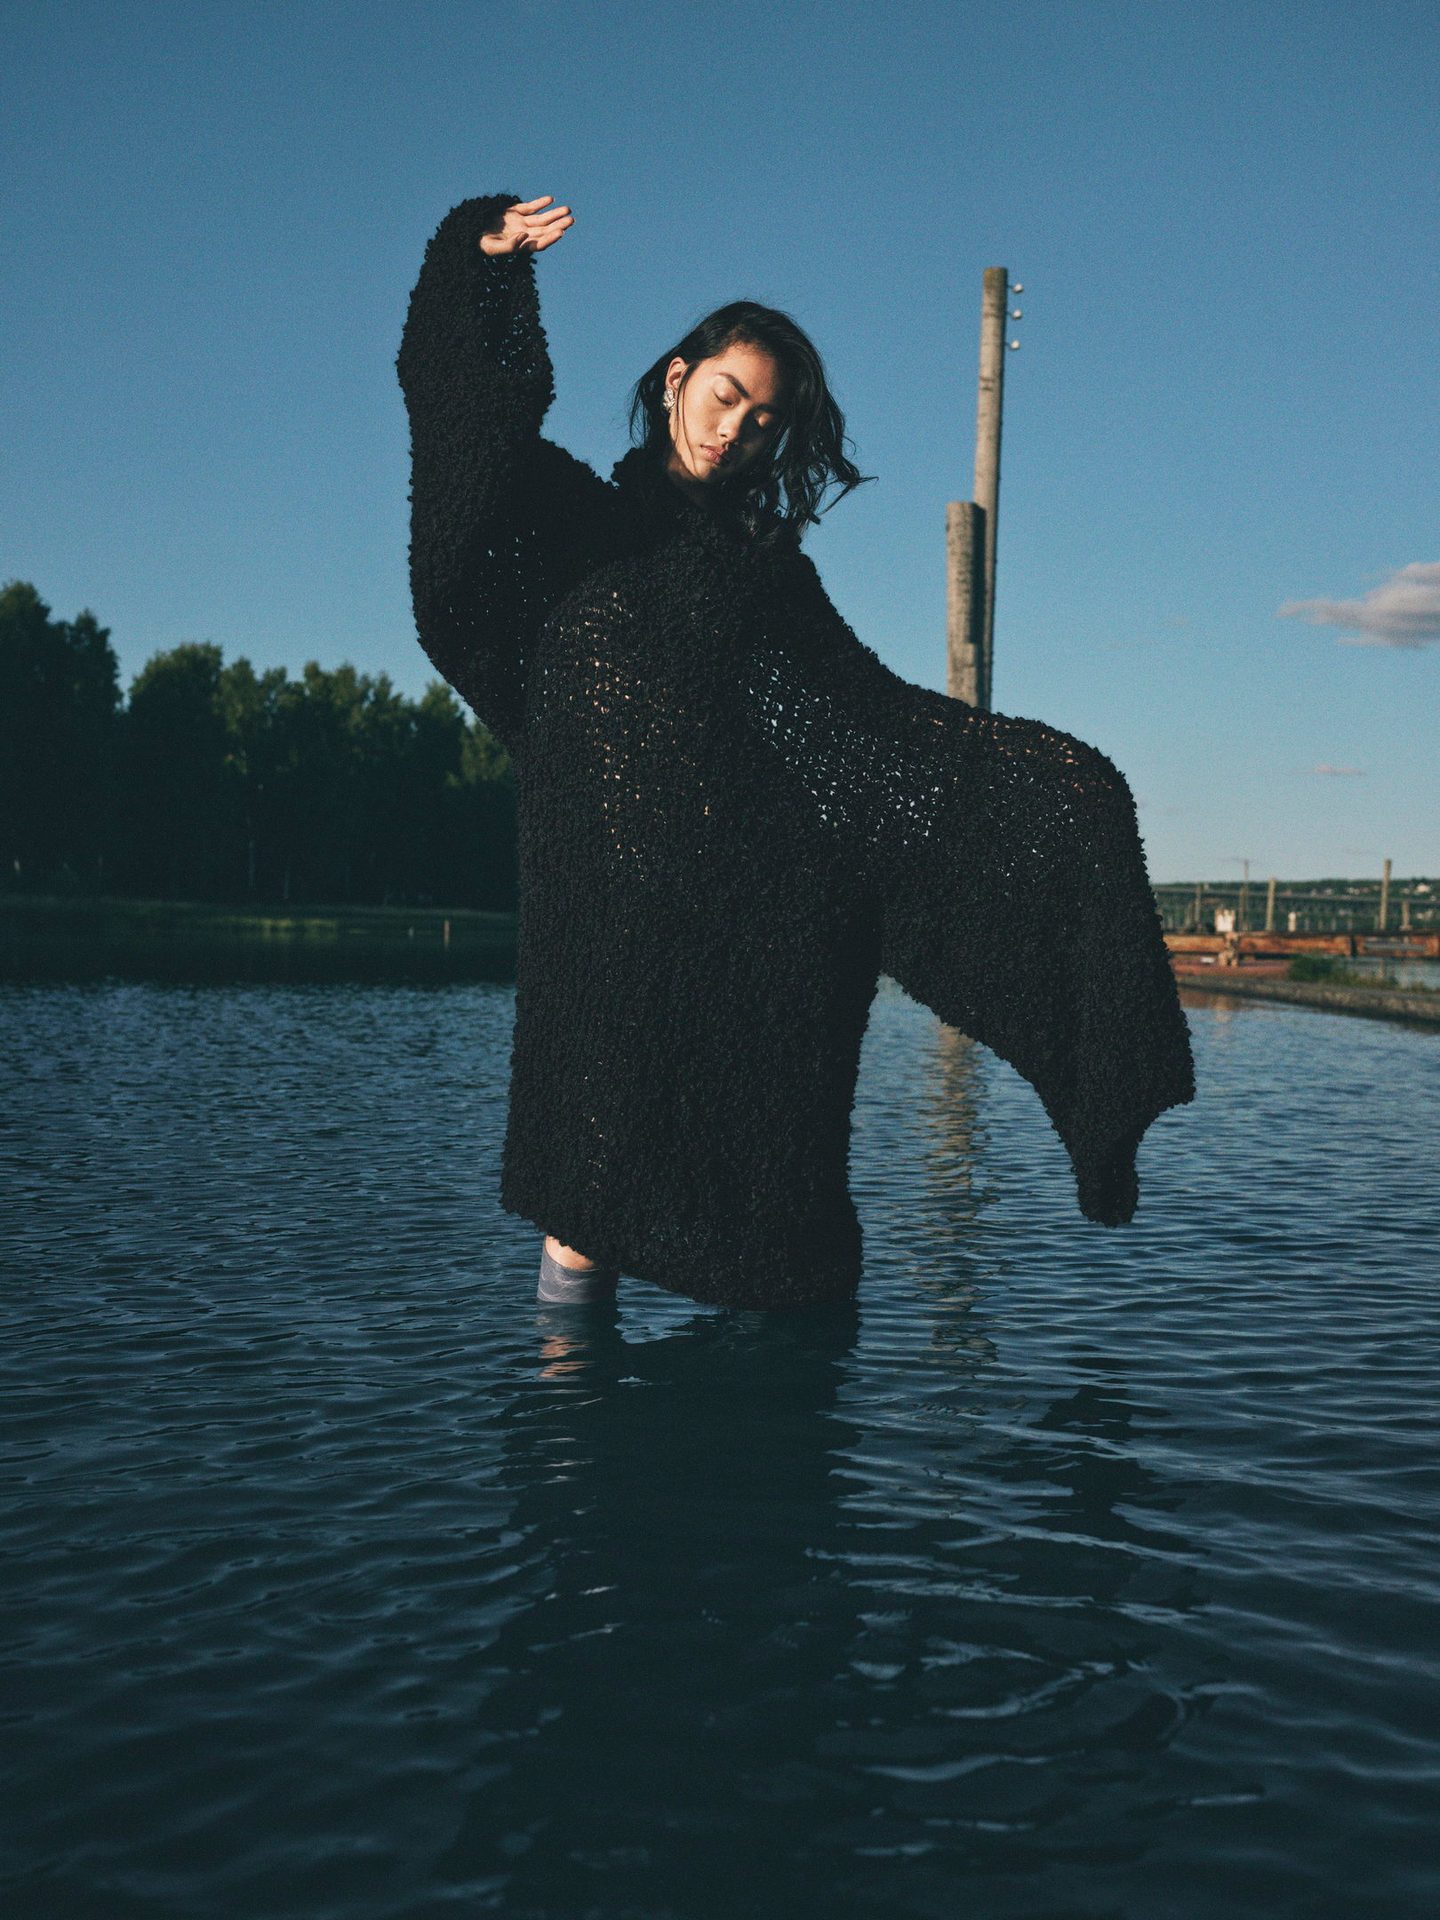 People in nature, Flash photography, Water, Sky, Sleeve, Gesture, Happy, Lake